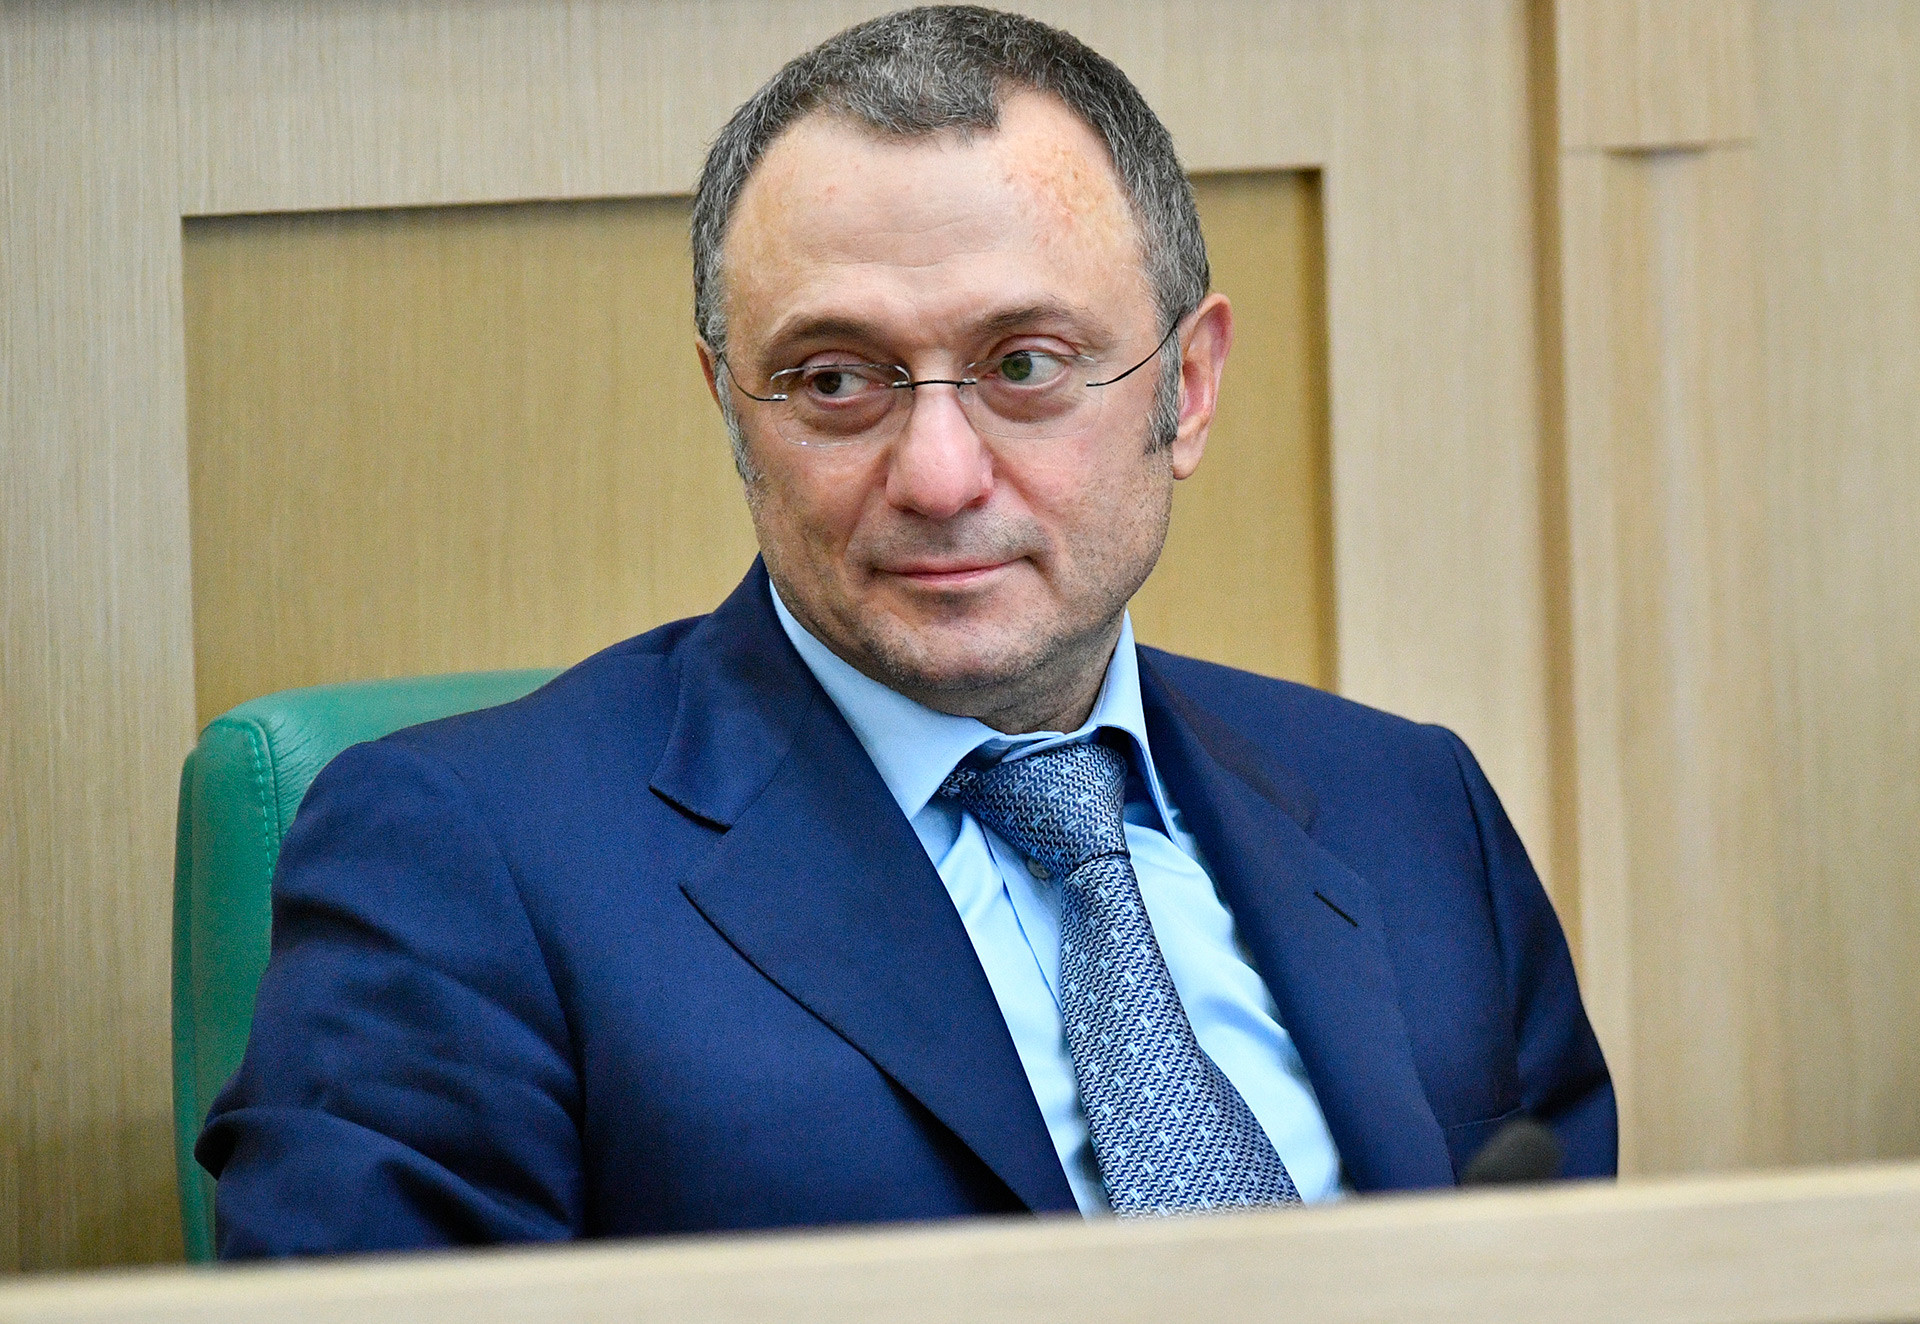 Suleiman Kerimov, the former Anzhi Makhachkala owner behind big-money signings such as Willian and Samuel Eto'o. He sold the club in 2016.